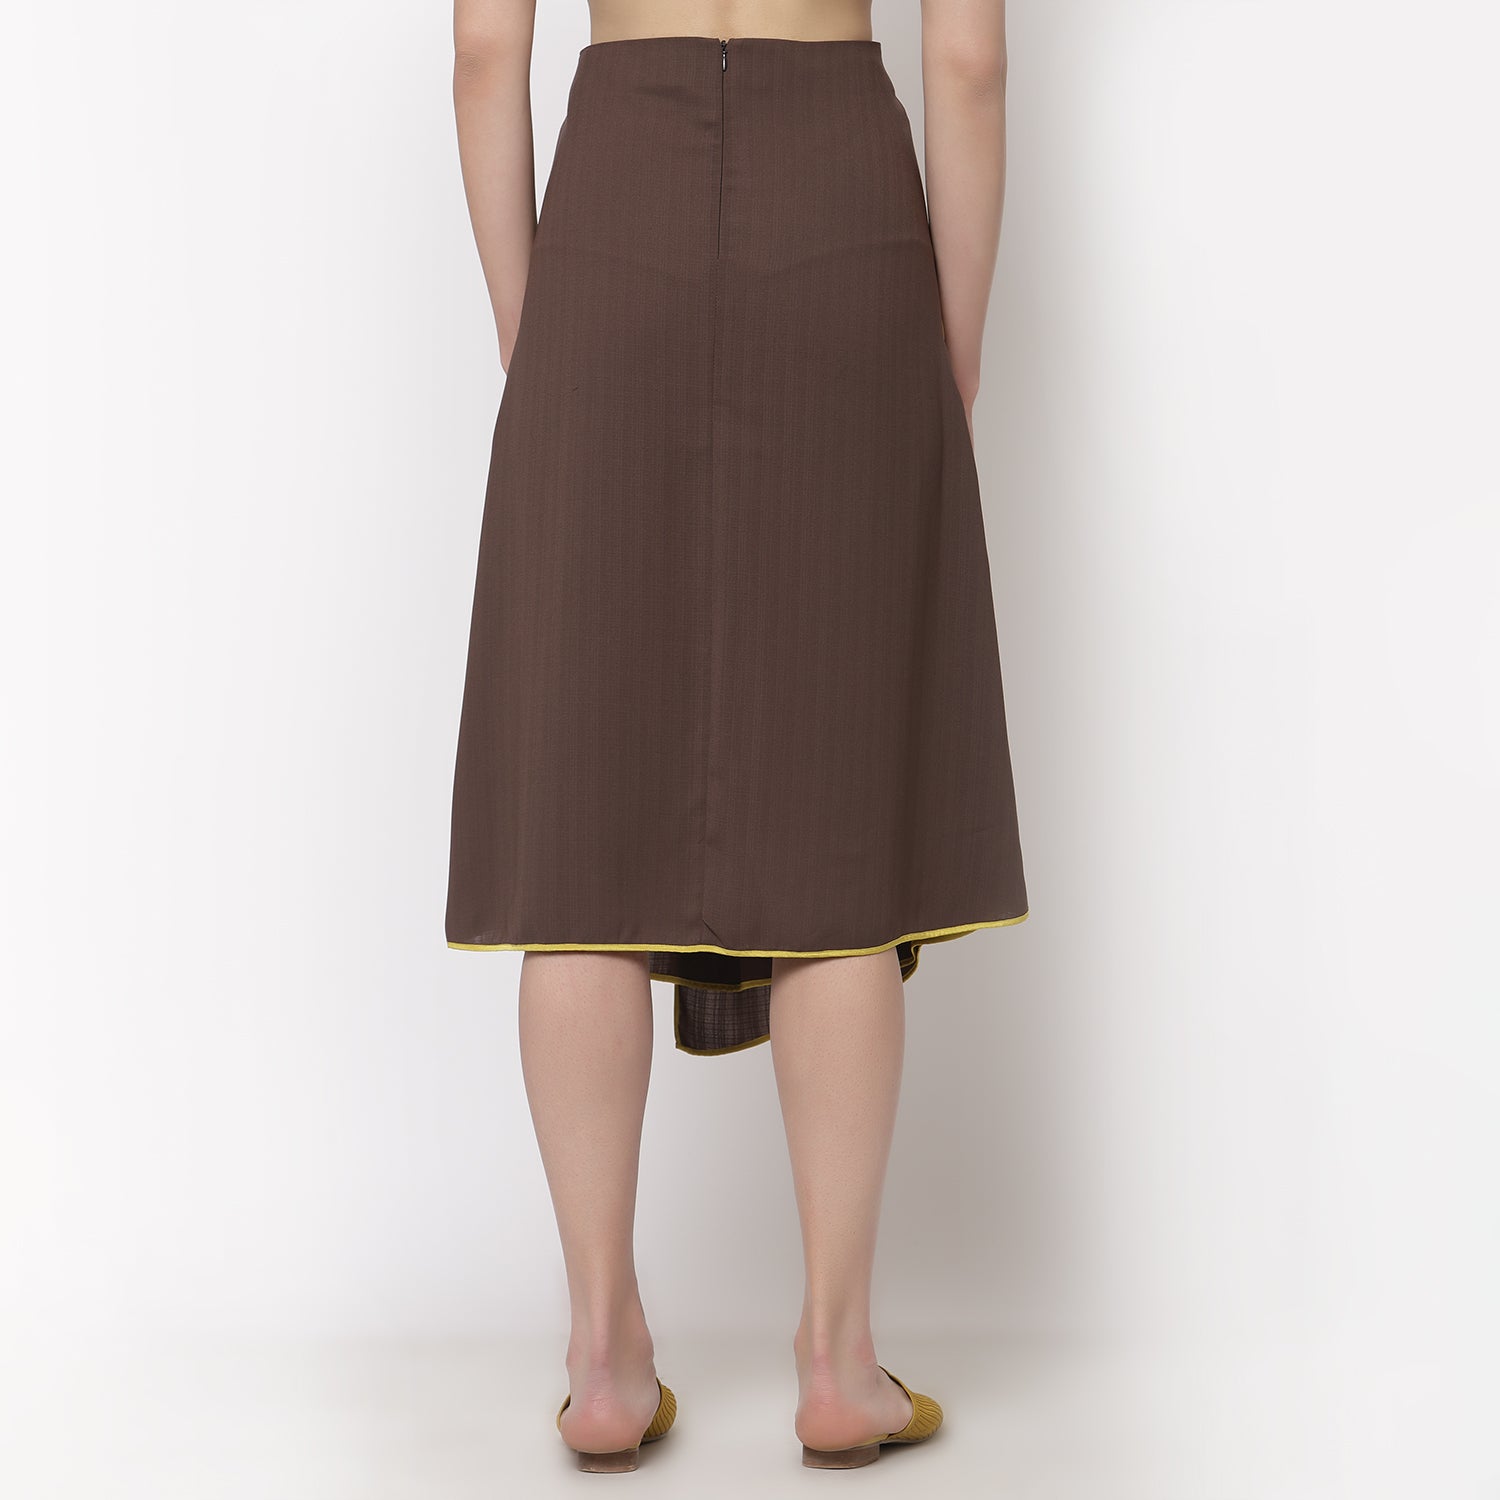 Brown Asymmetrical Skirt With Yellow Piping